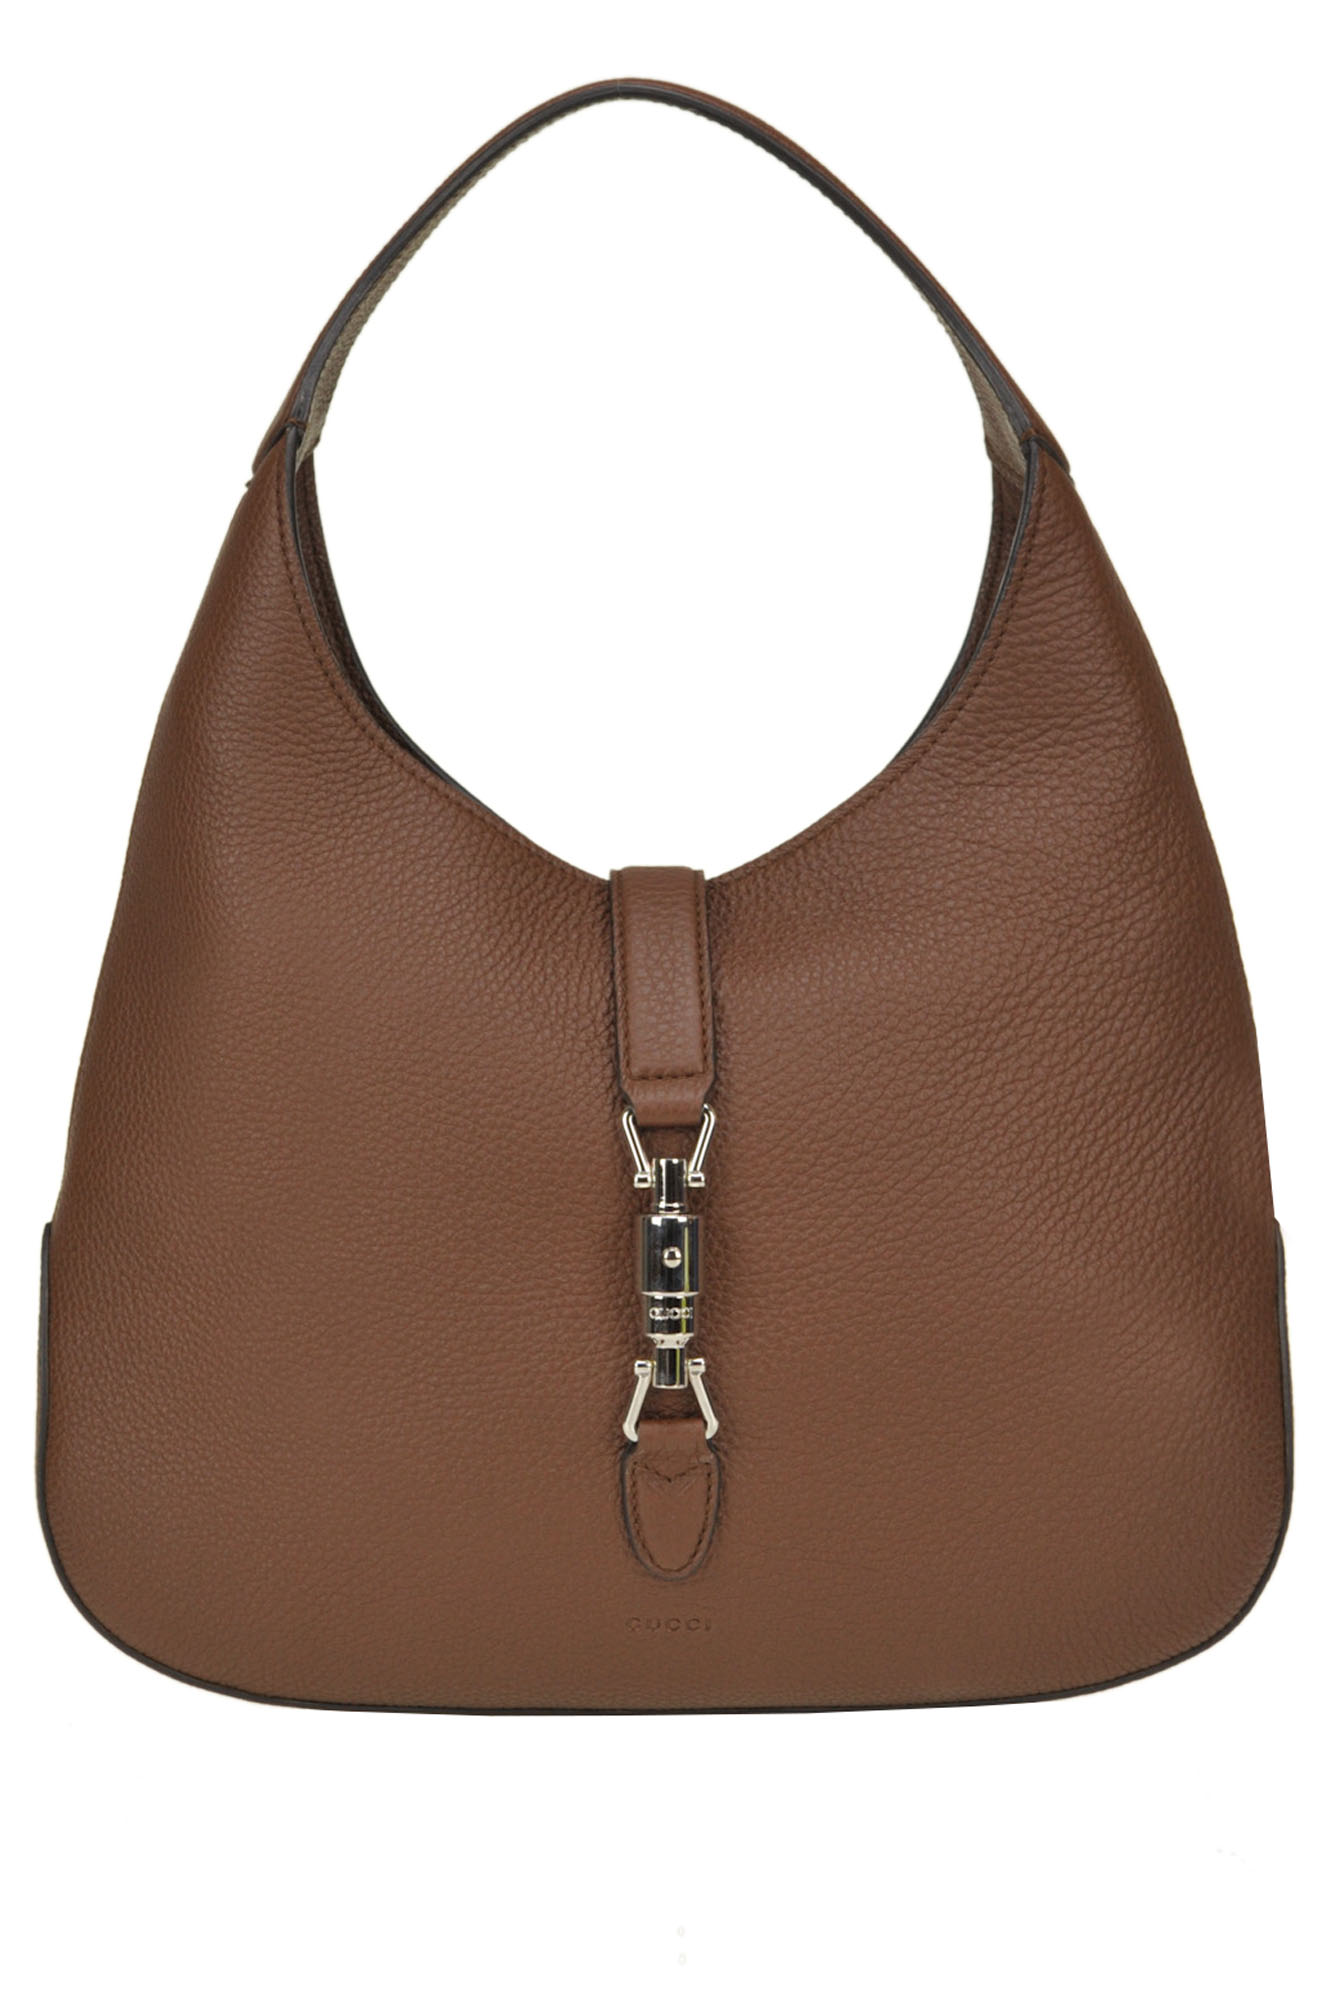 Gucci Grainy Leather Hobo Bag In Brown